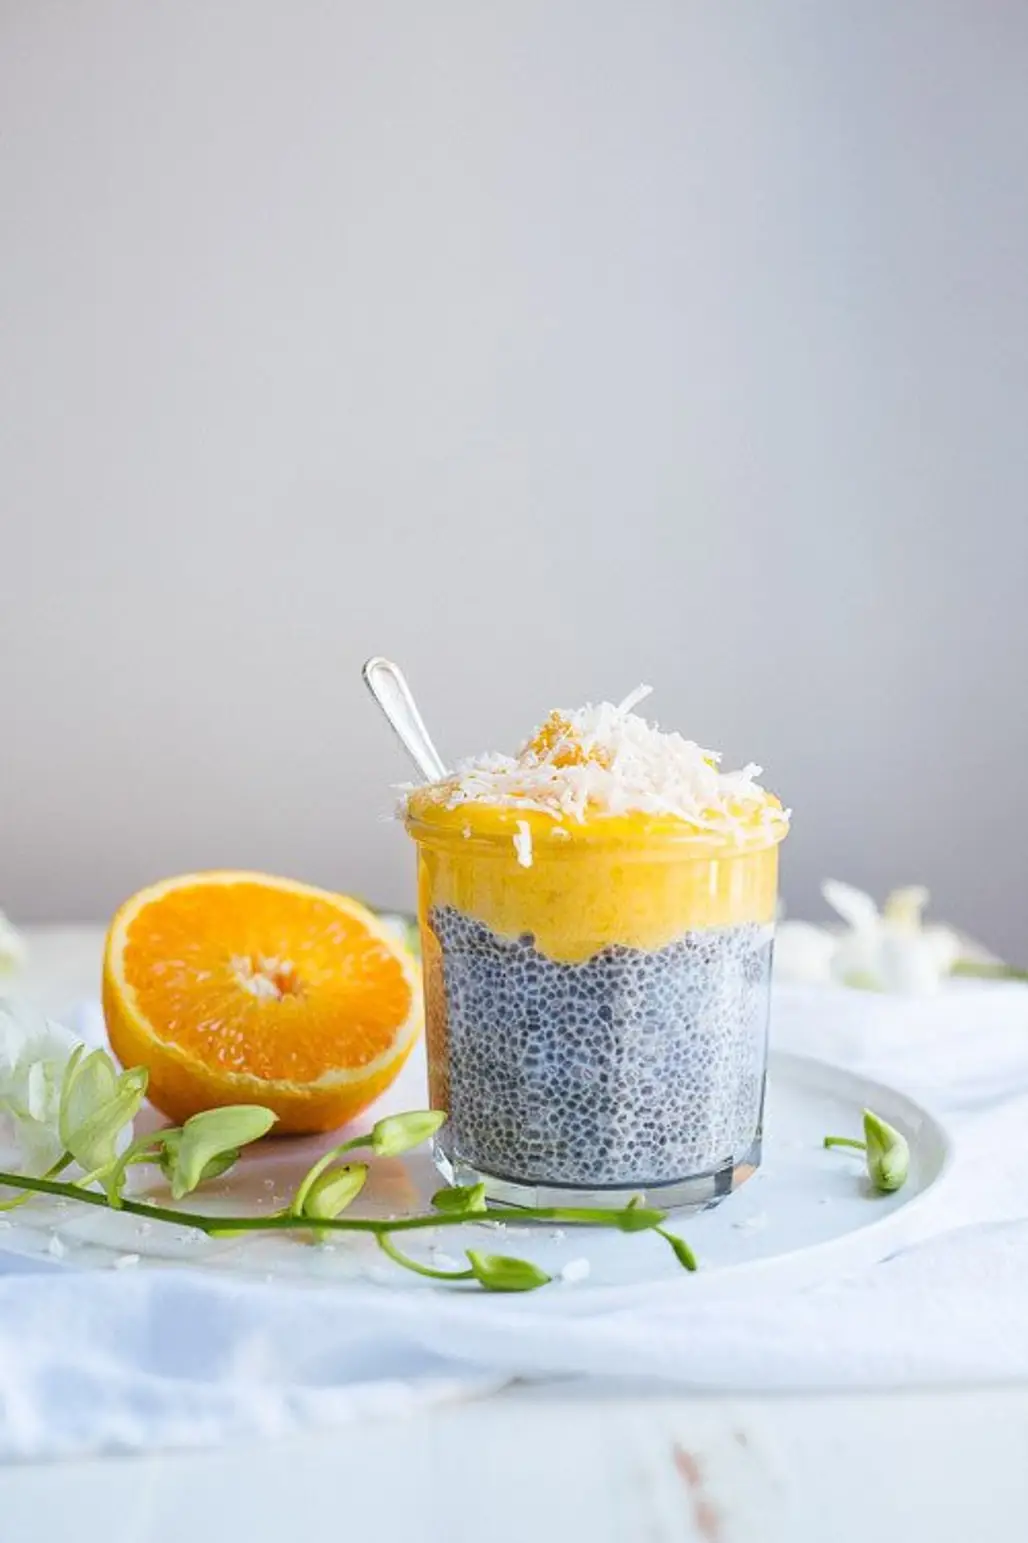 Chia Seed Pudding is Full of Healthy Fat to Keep You Focused